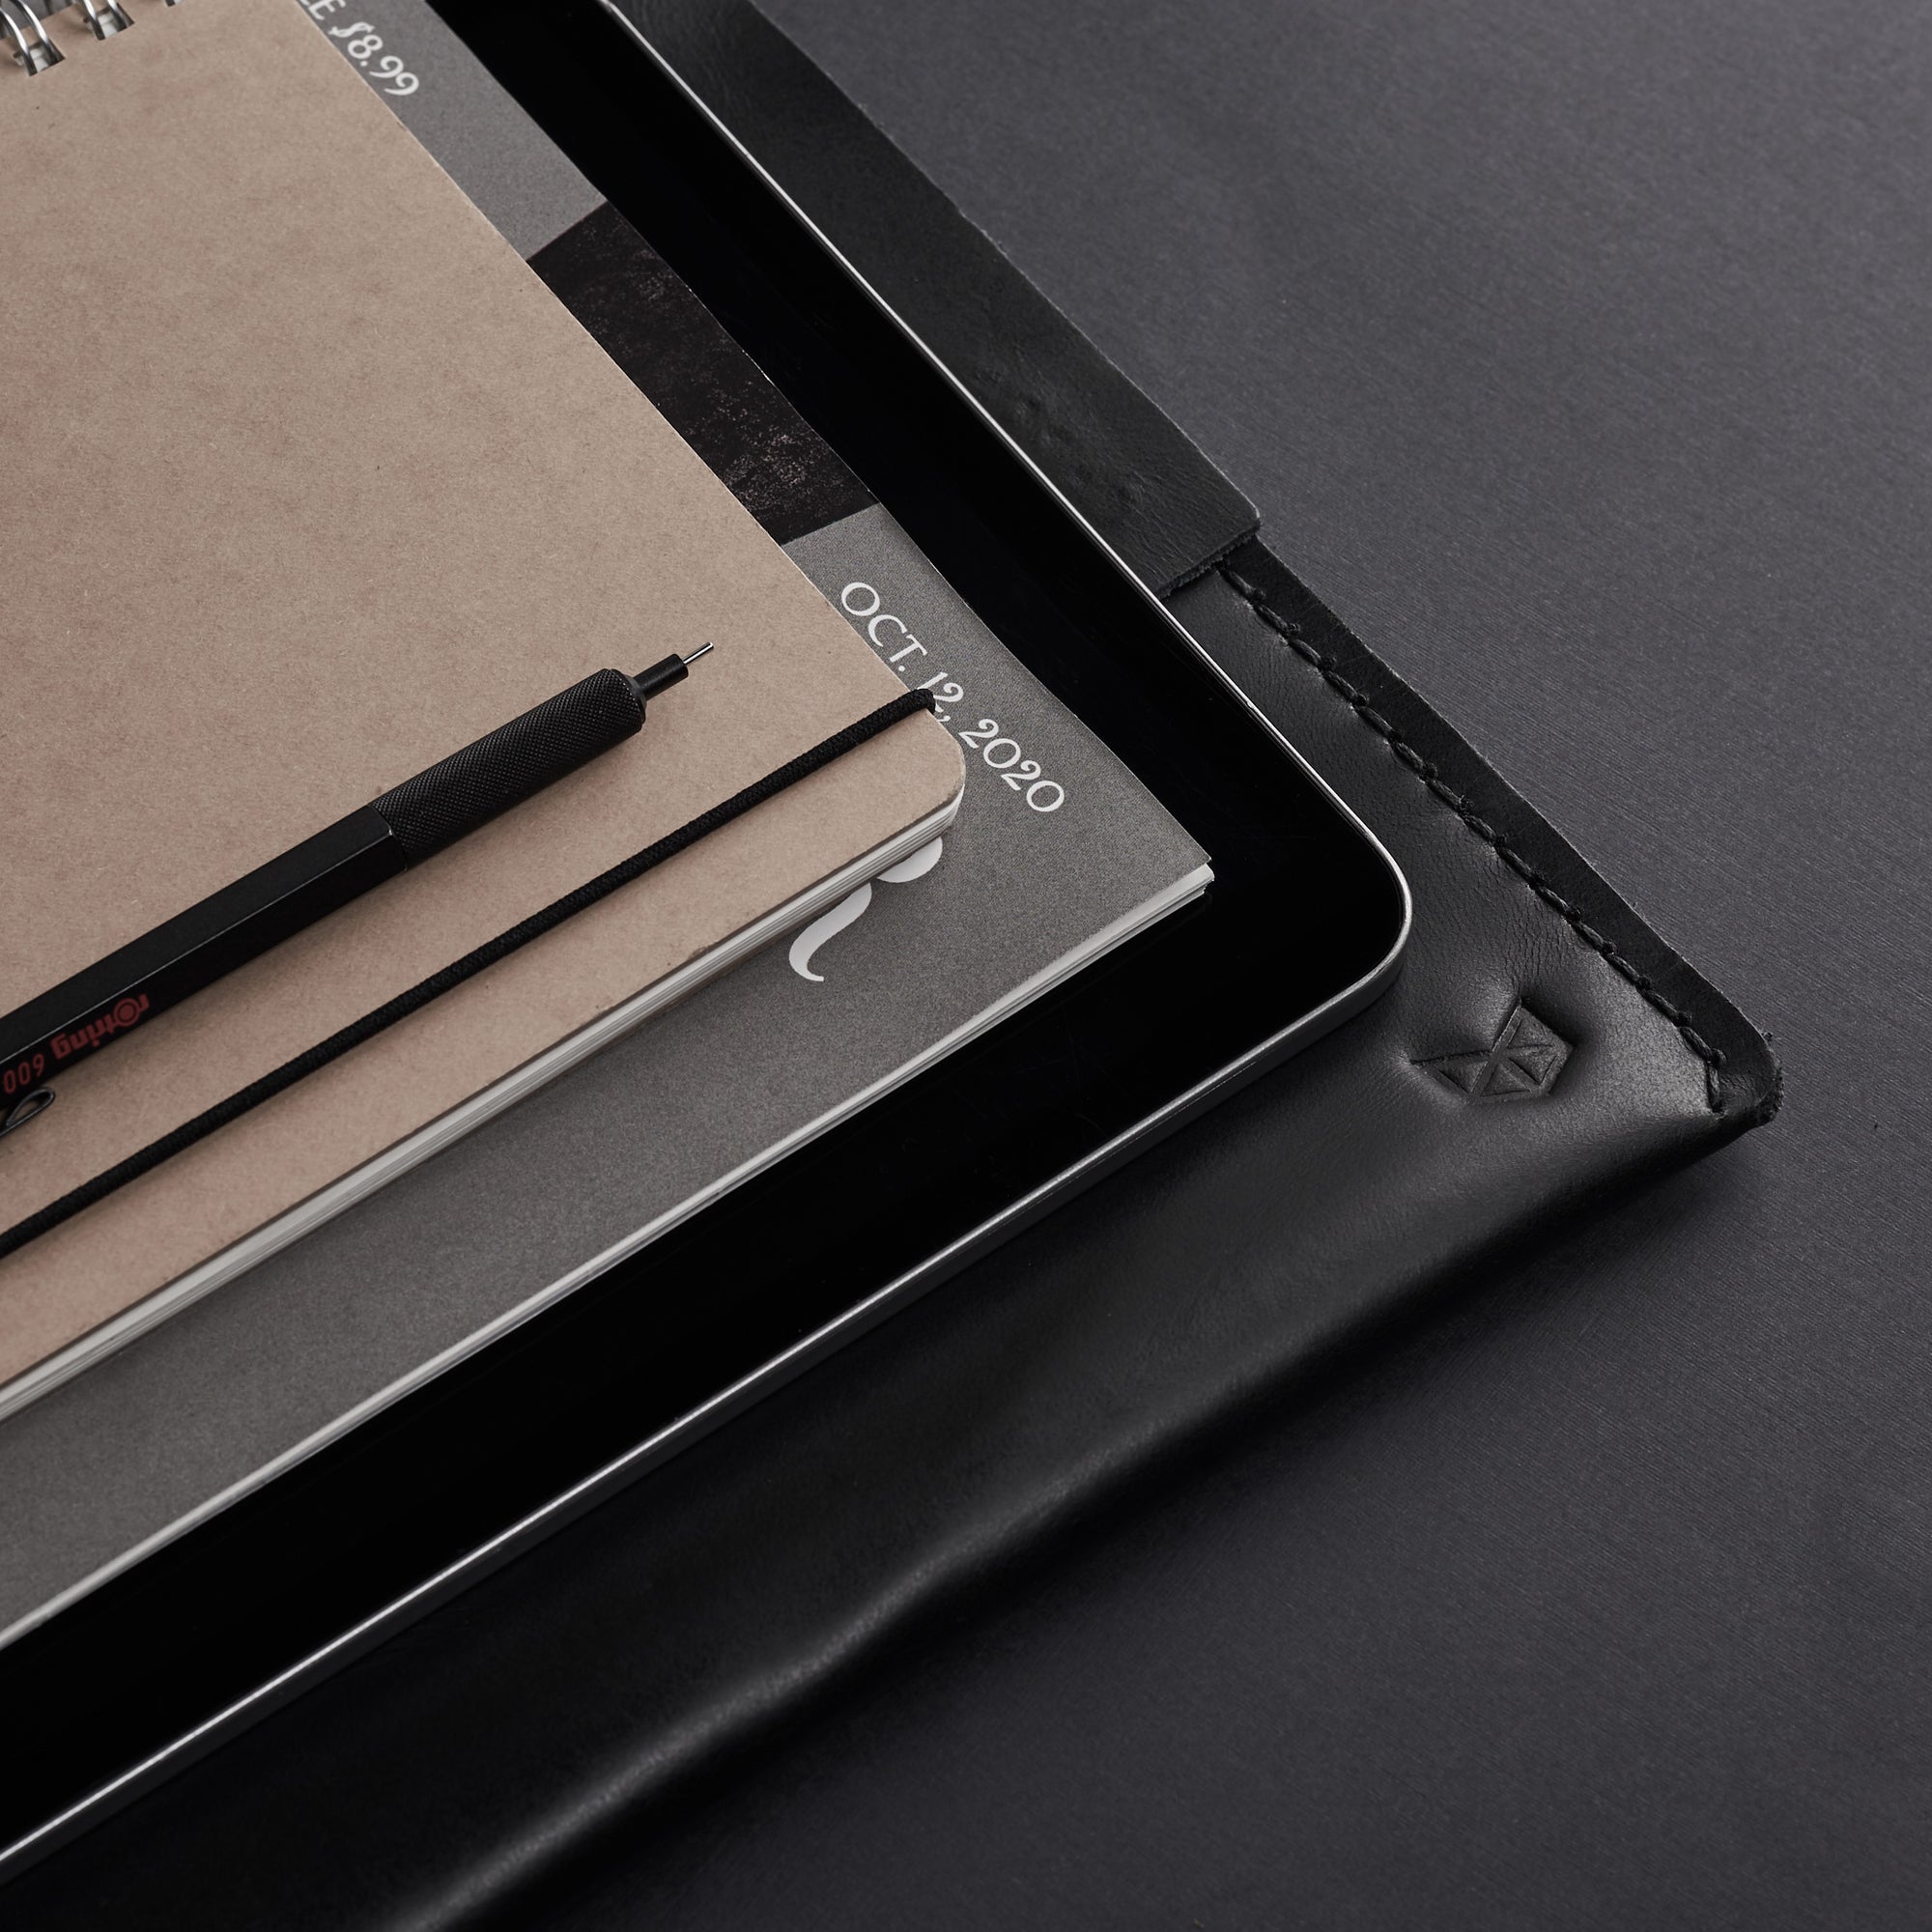 Style. Black Leather Minial iPad Sleeve Case by Capra Leather